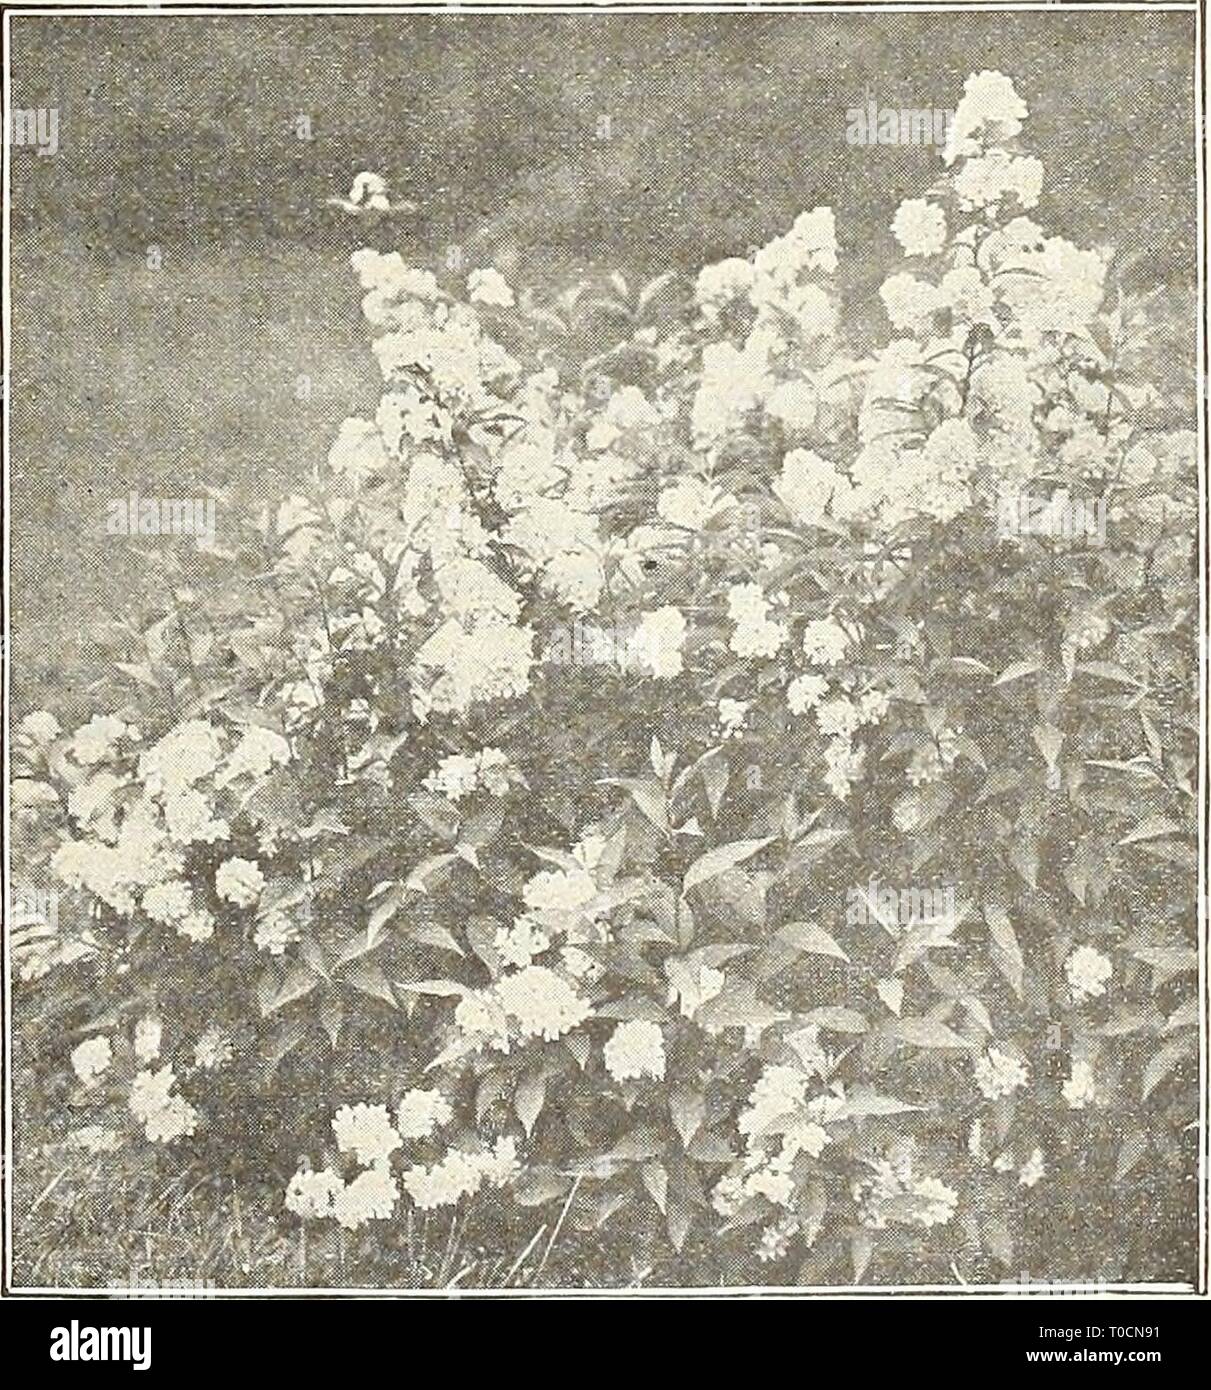 Dreer's garden book 1927 (1927) Dreer's garden book 1927 dreersgardenbook1927henr Year: 1927  Deutzia Crenata Magnifica Deutzias. Well-known profuse flowering Shrubs, blooming in spring or early summer. The dwarf varieties are desirable for forcing under glass. — Candidissima plena. A fine tall, double white, 60 cts. each. — Crenata Magnifica. A most distinct variety with excep- tionally large corymbs of pure white double flowers, produced in wonderful profusion. 60 cts. each. — Crenata Mirabilis (New). Of very vigorous habit, the long branches carry enormous pyramidal panicles of upright milk Stock Photo